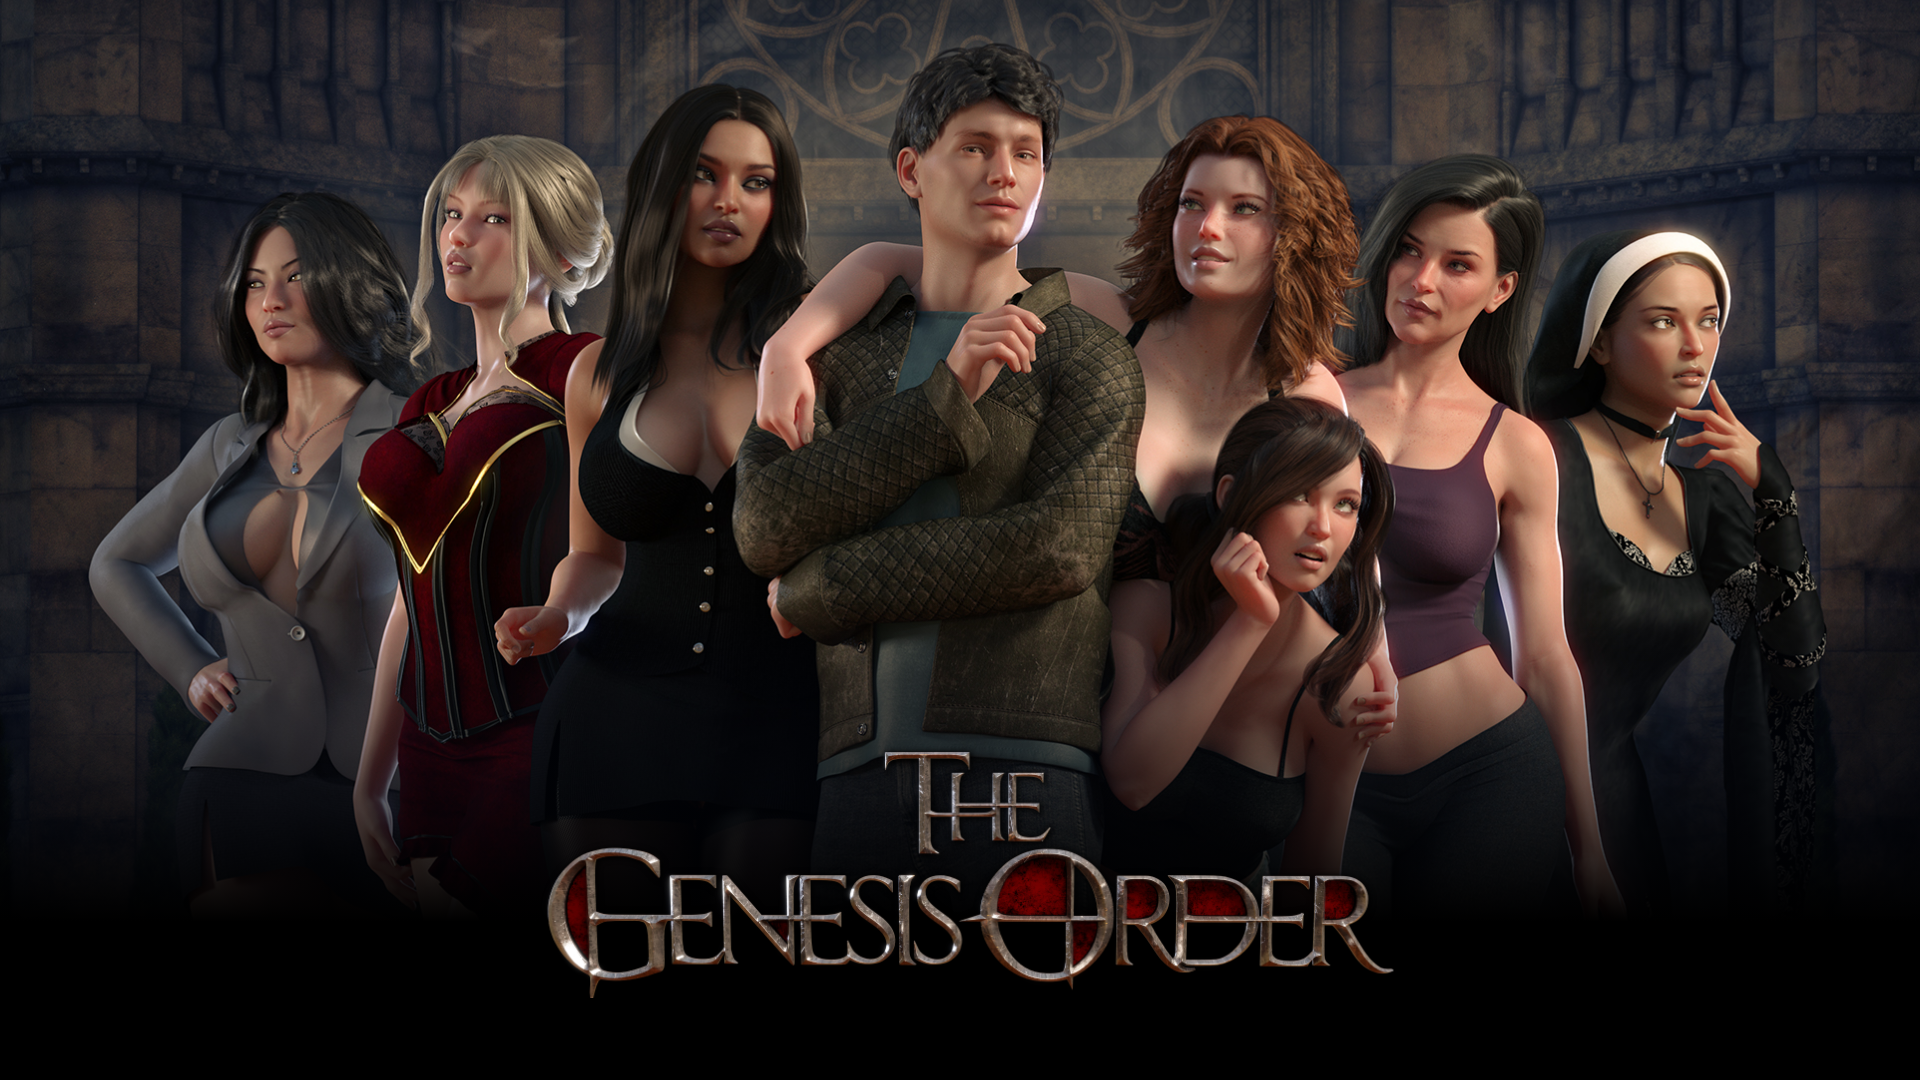 The Genesis Order integration with Lovense